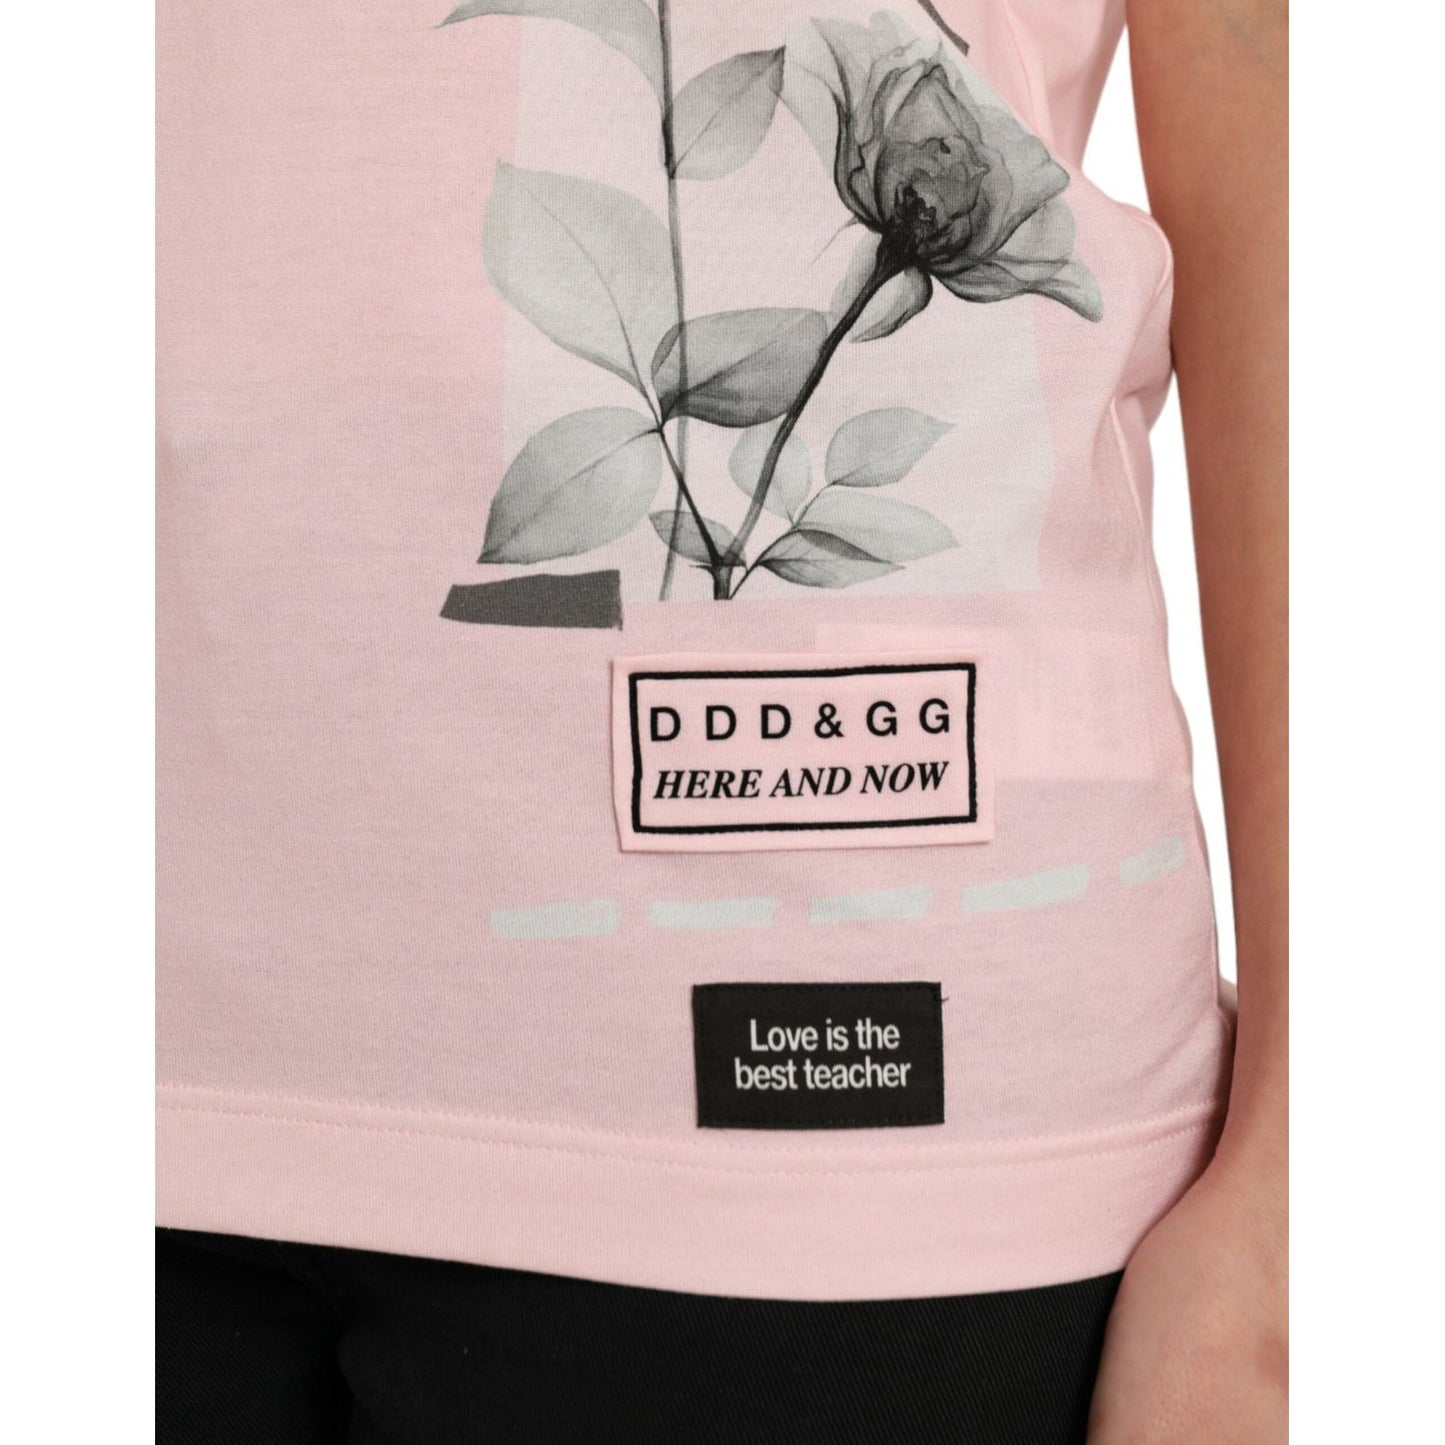 Dolce & Gabbana Chic Pink Floral Cotton Tee chic-pink-floral-cotton-tee